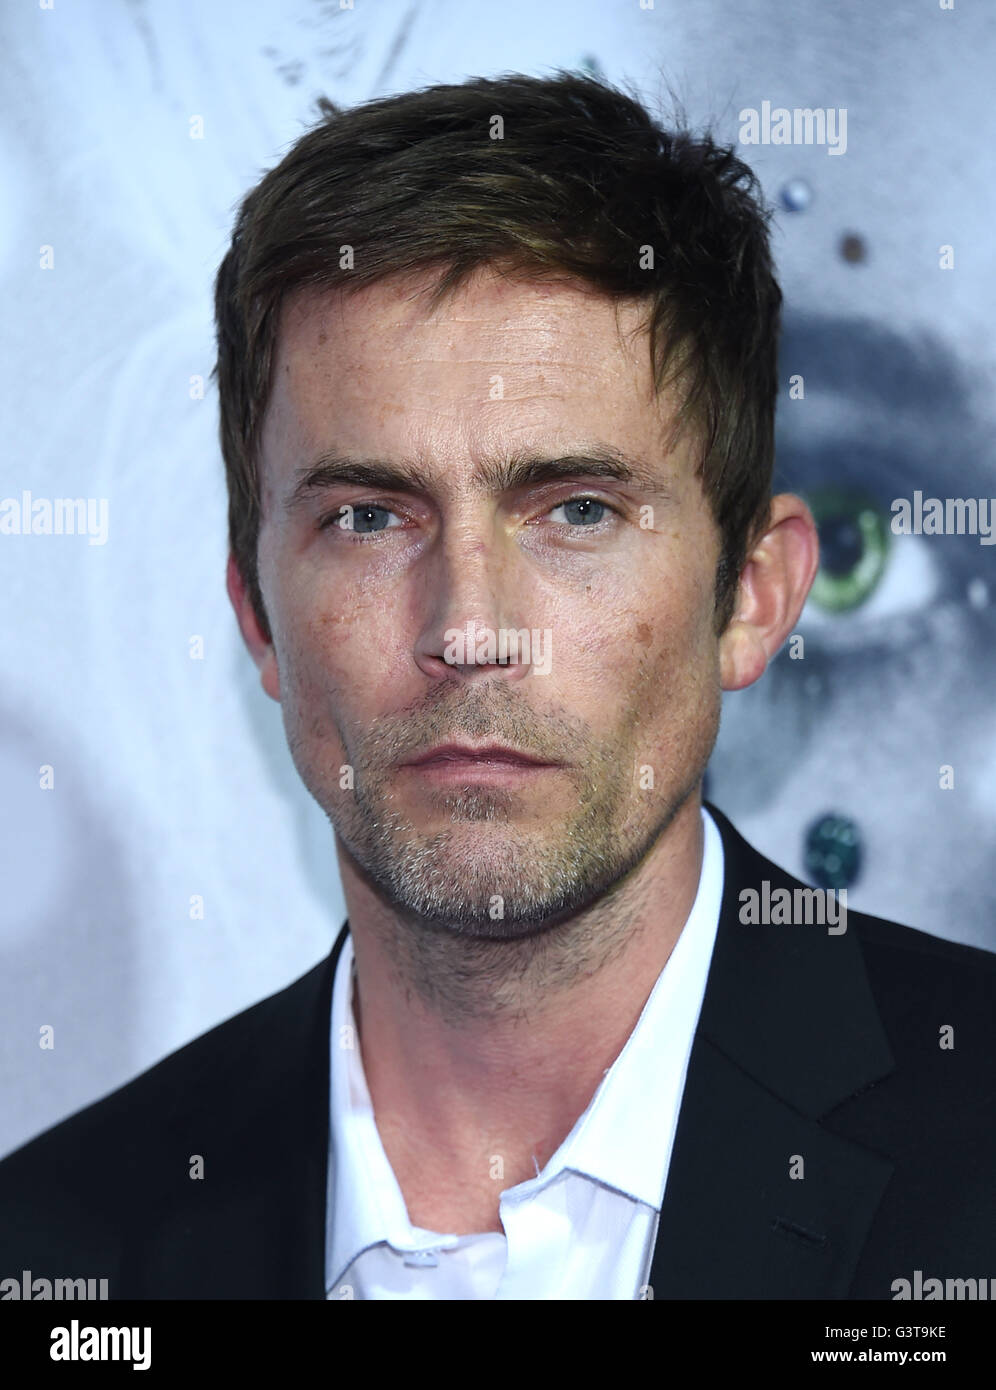 Hollywood, California, USA. 14th June, 2016. Desmond Harrington arrives for  the premiere of the film 'The Neon Demon' at the Cinema Dome theater.  Credit: Lisa O'Connor/ZUMA Wire/Alamy Live News Stock Photo -